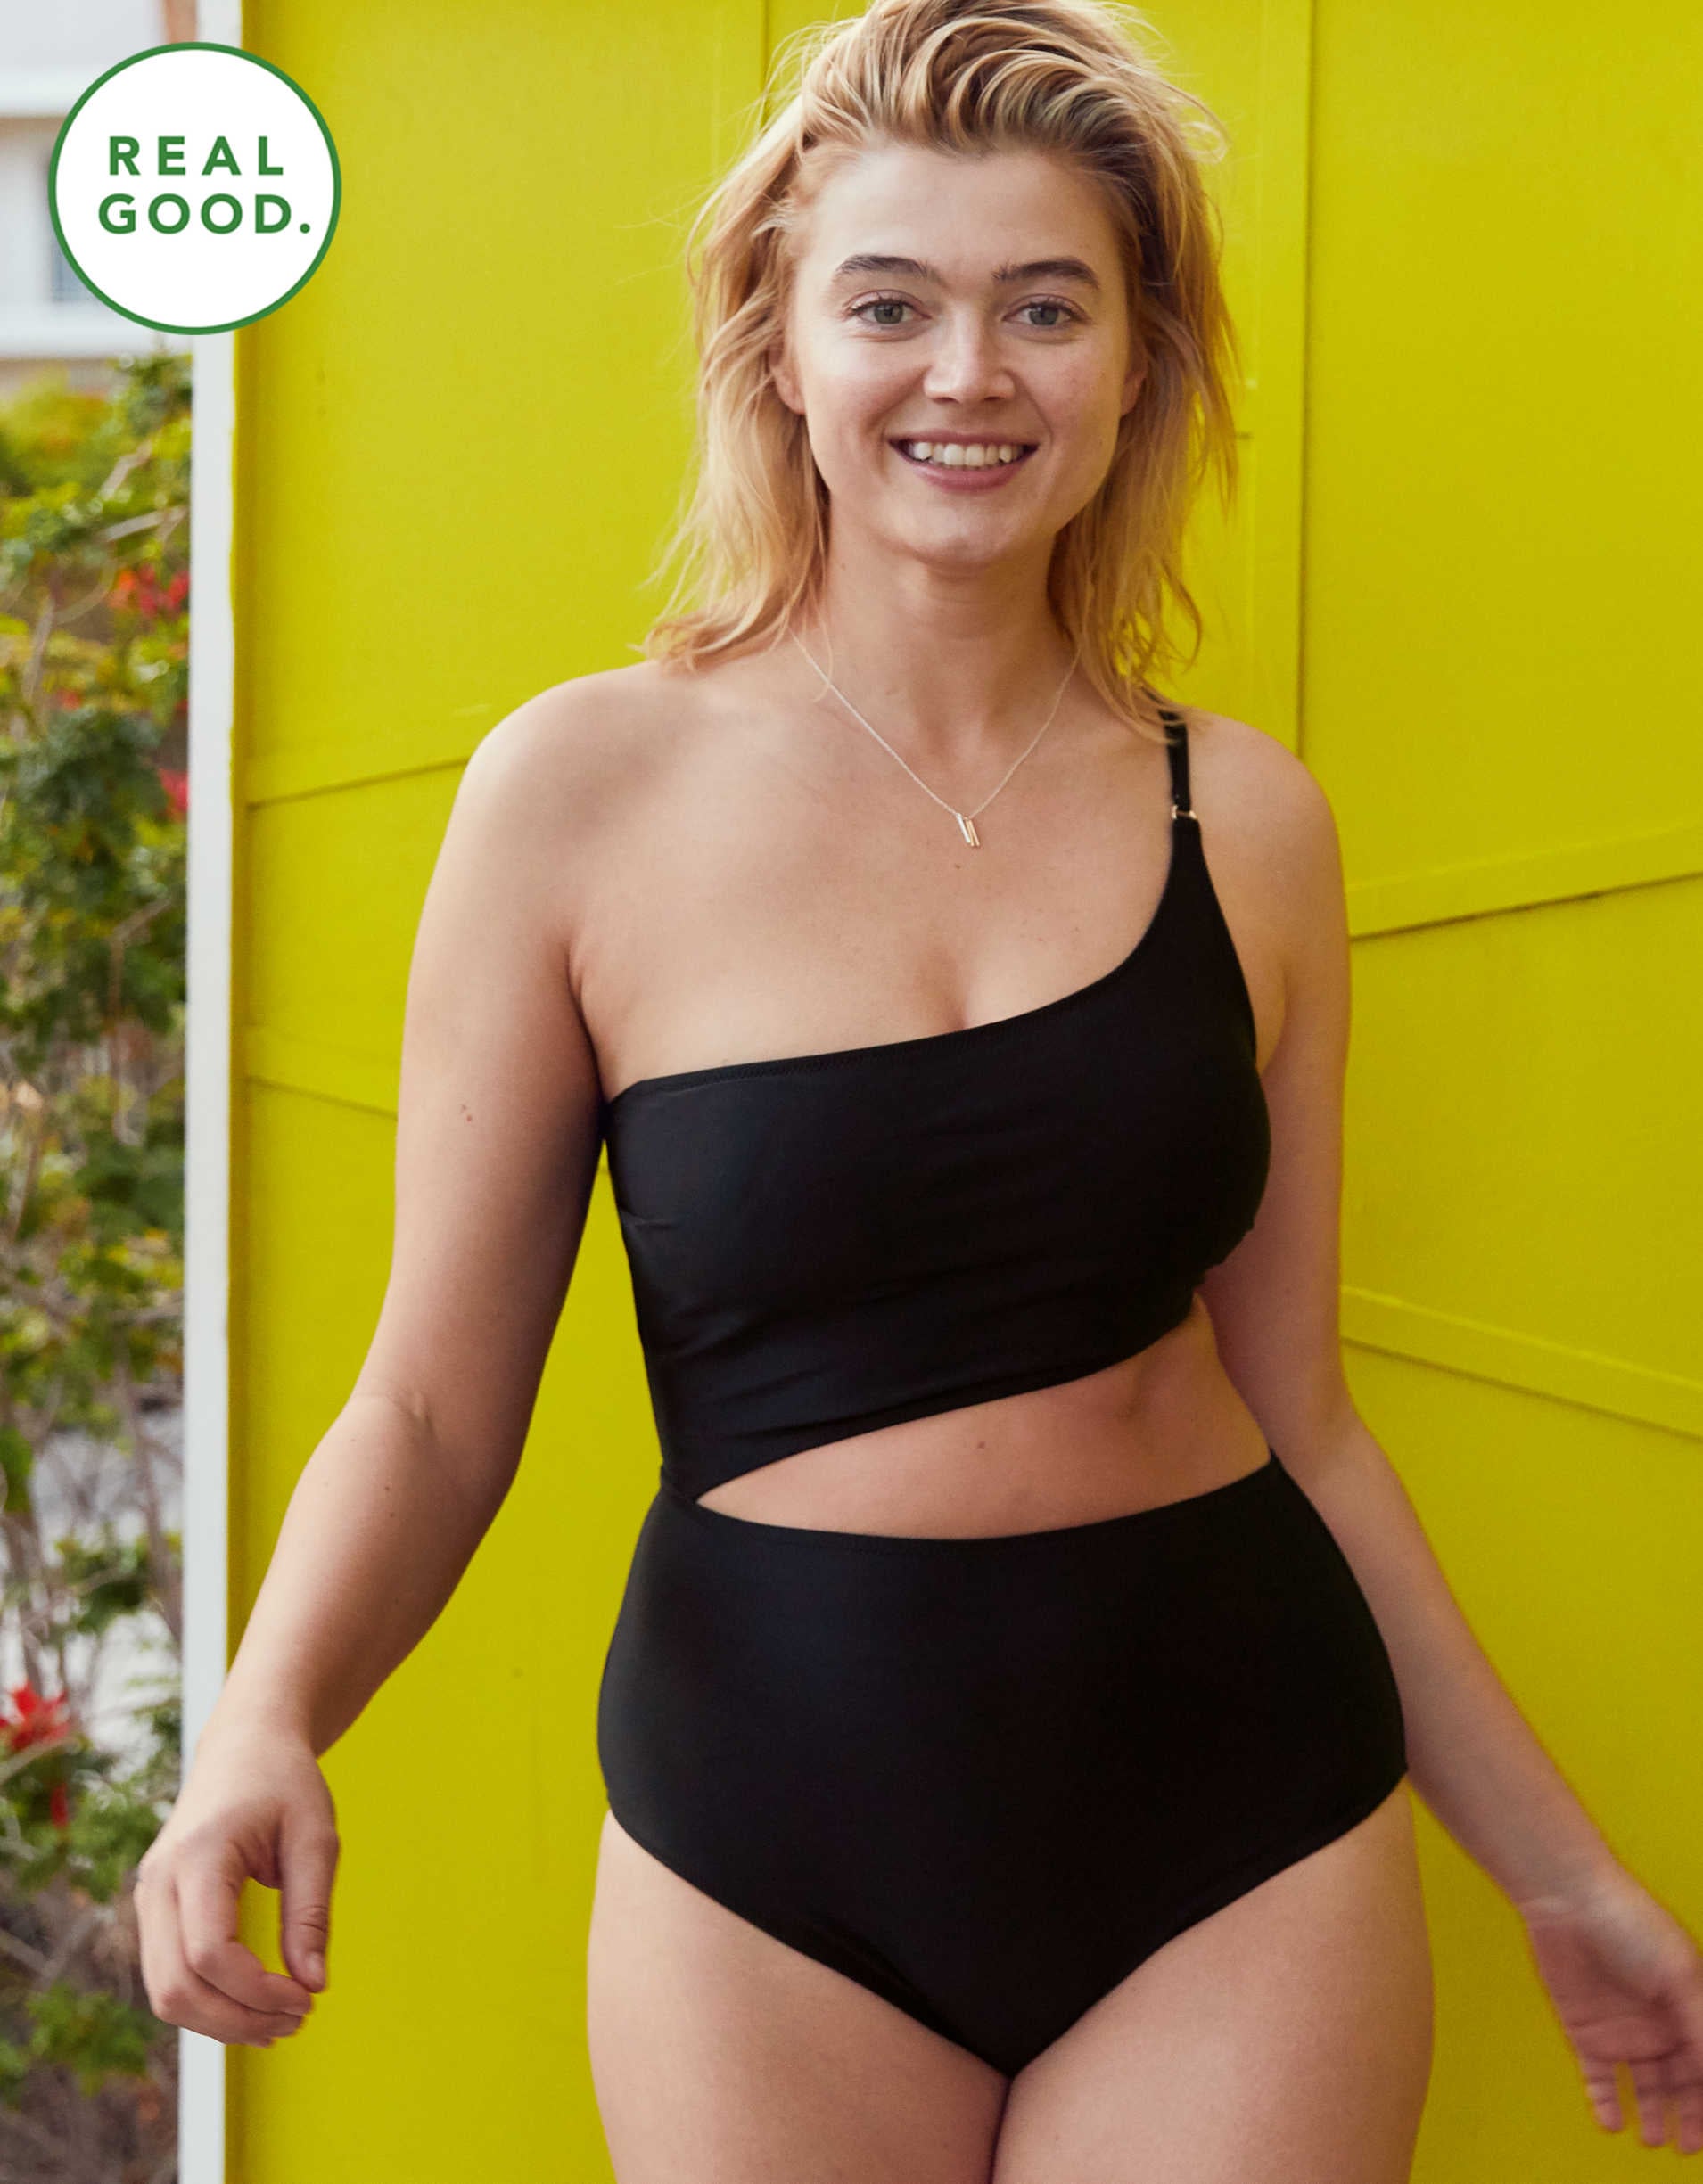 aerie ribbed bandeau one piece swimsuit